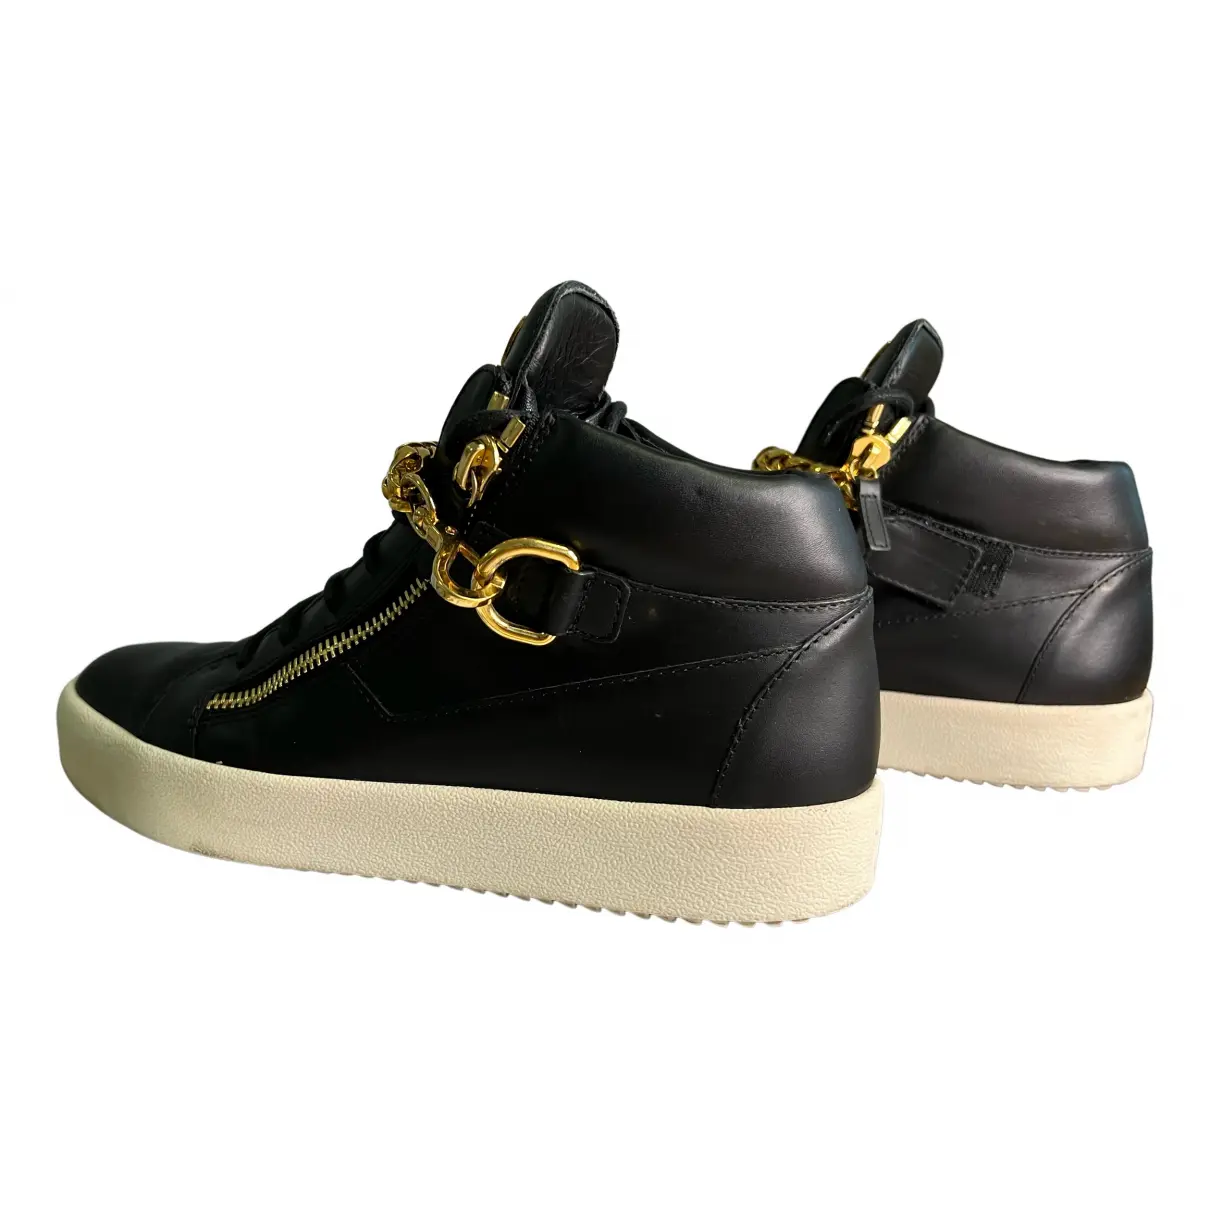 Buy Giuseppe Zanotti Coby leather high trainers online